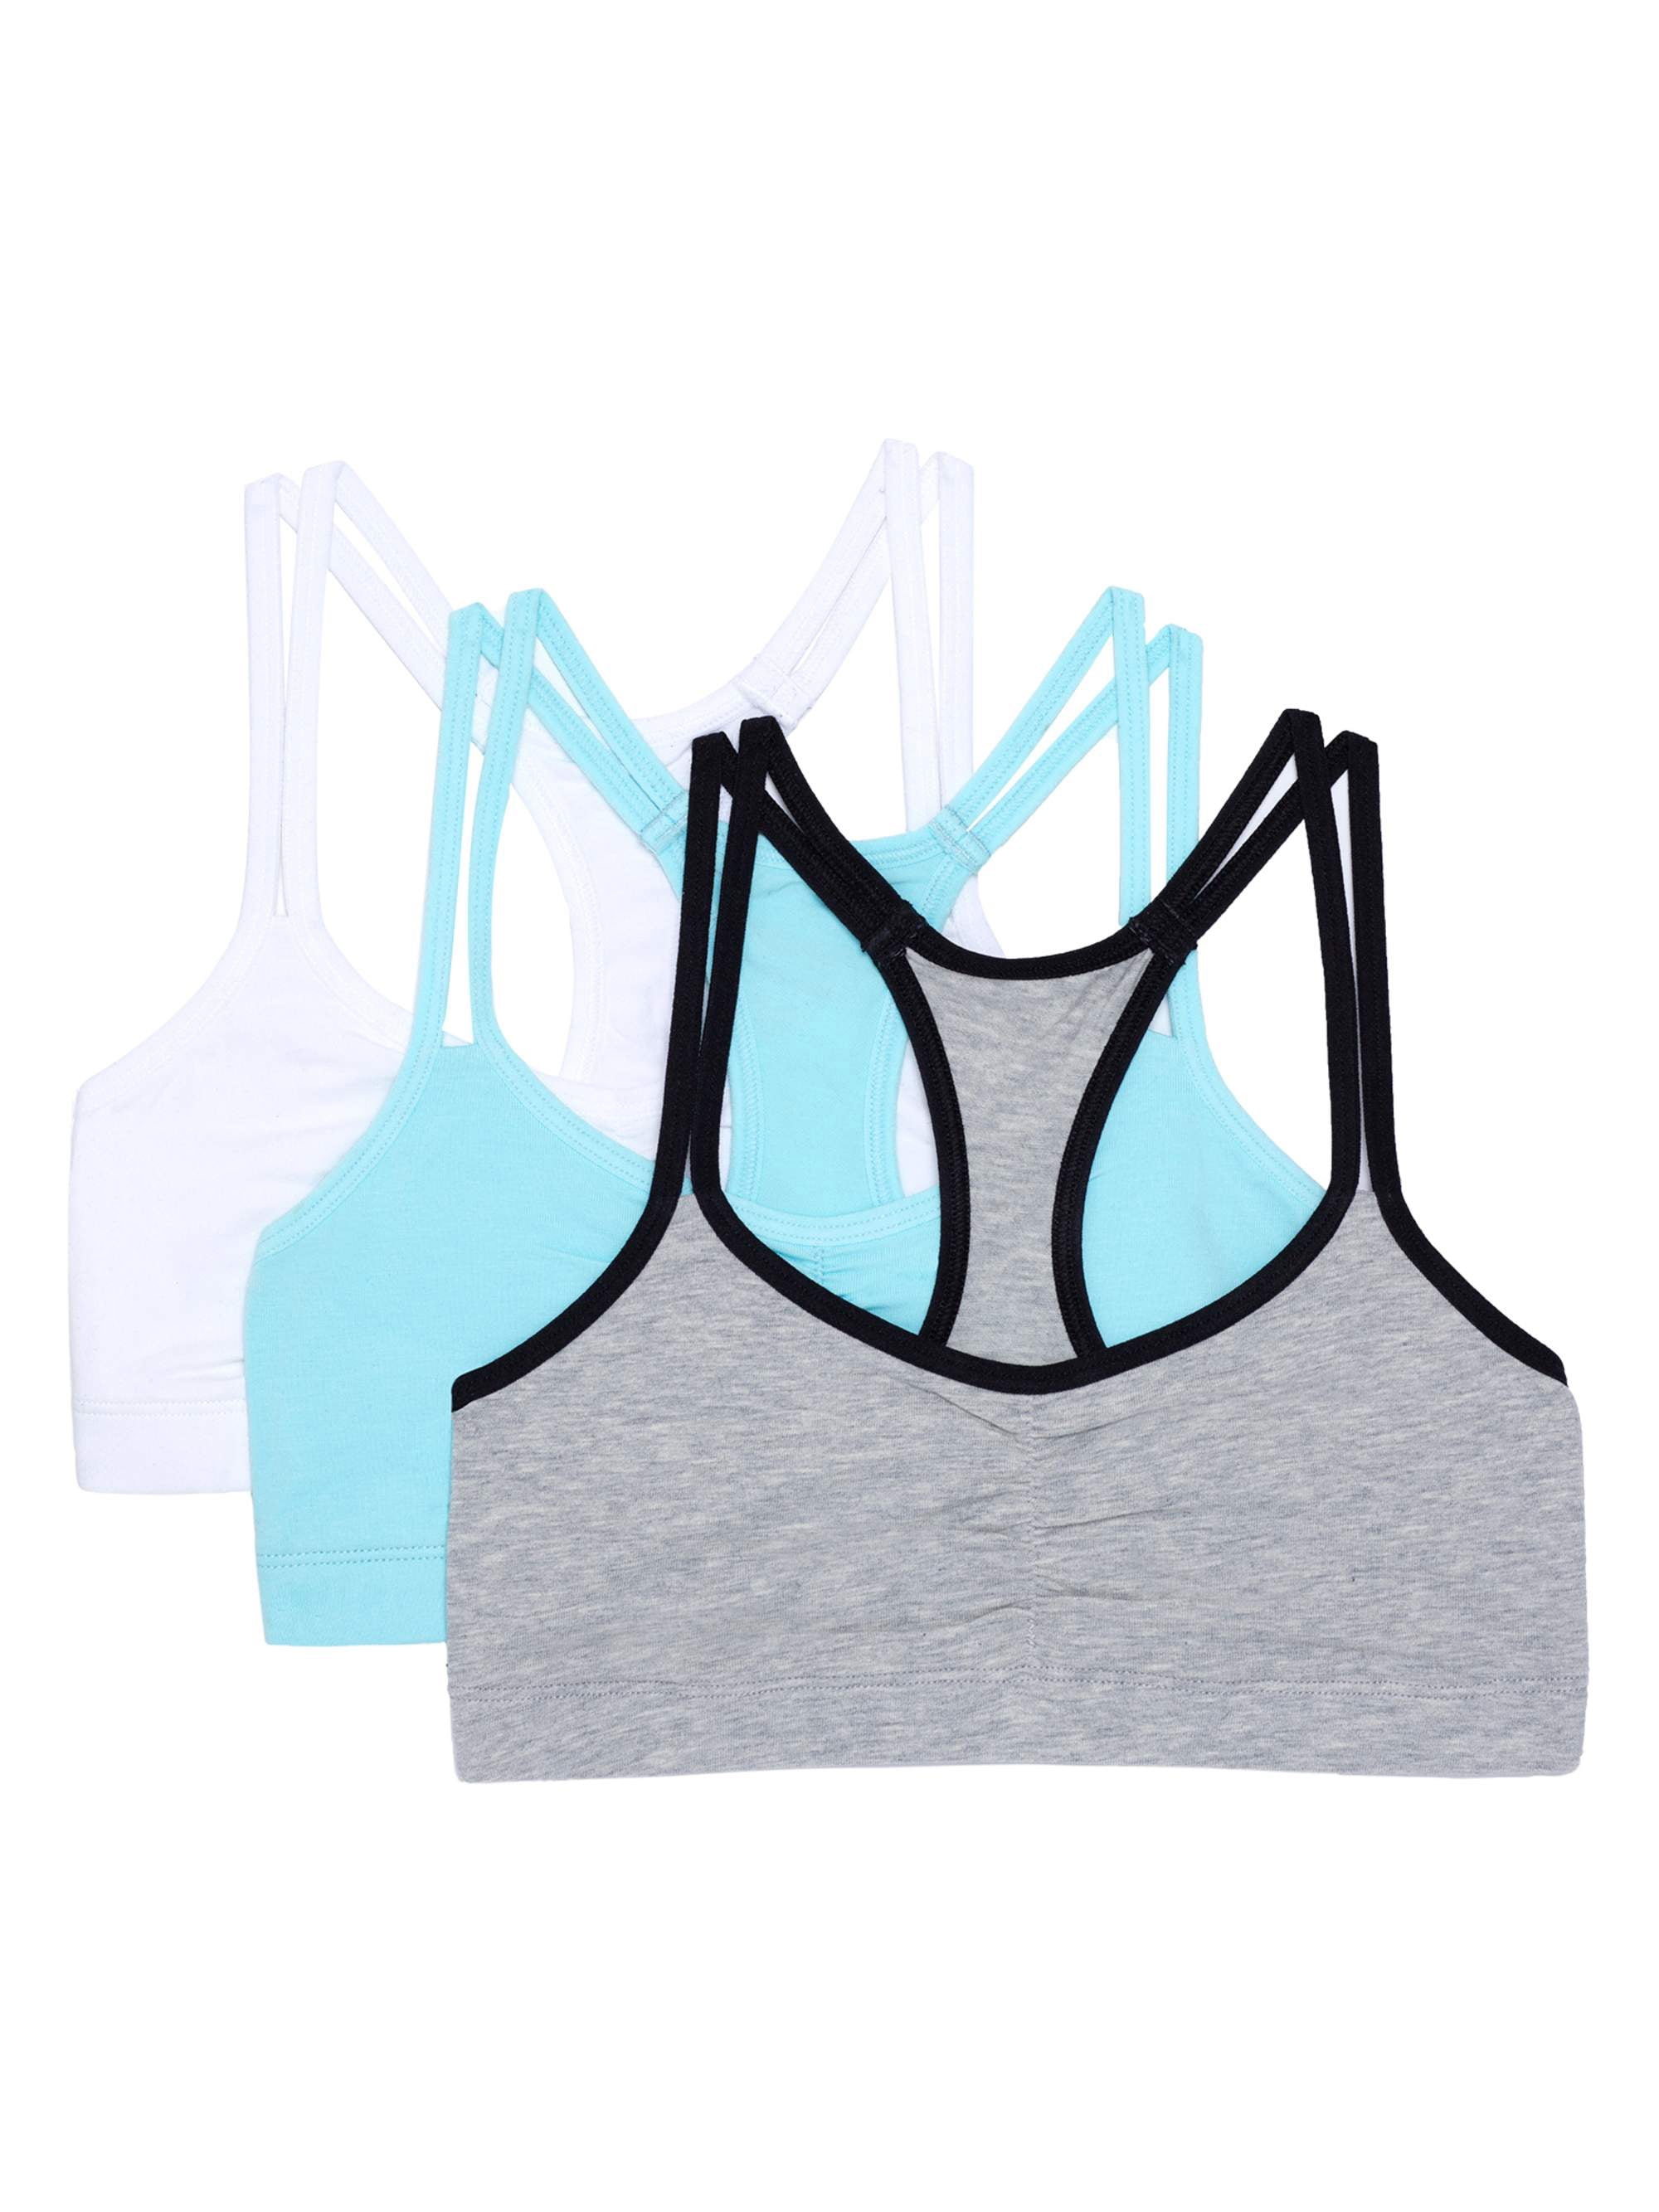 Fruit of the Loom Girls Cotton Sports Bra 3-Pack, Sizes 30-38